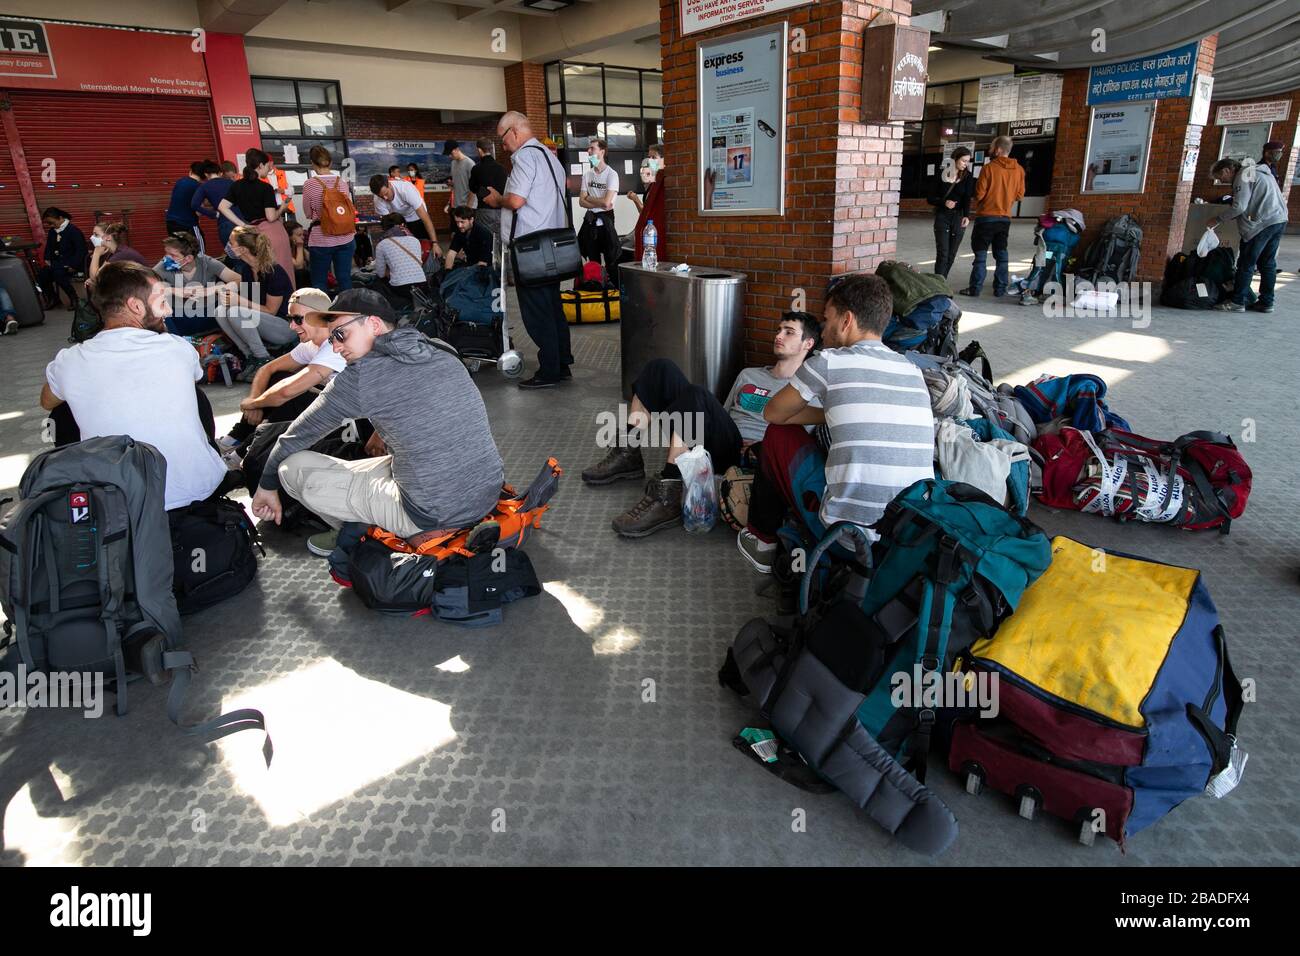 Tourists from Germany who have been stranded in Nepal due to the government-imposed lock down amid concerns over the spread of Coronavirus, wait for their chartered flight back home, at Tribhuvan International Airport in Kathmandu. Stock Photo